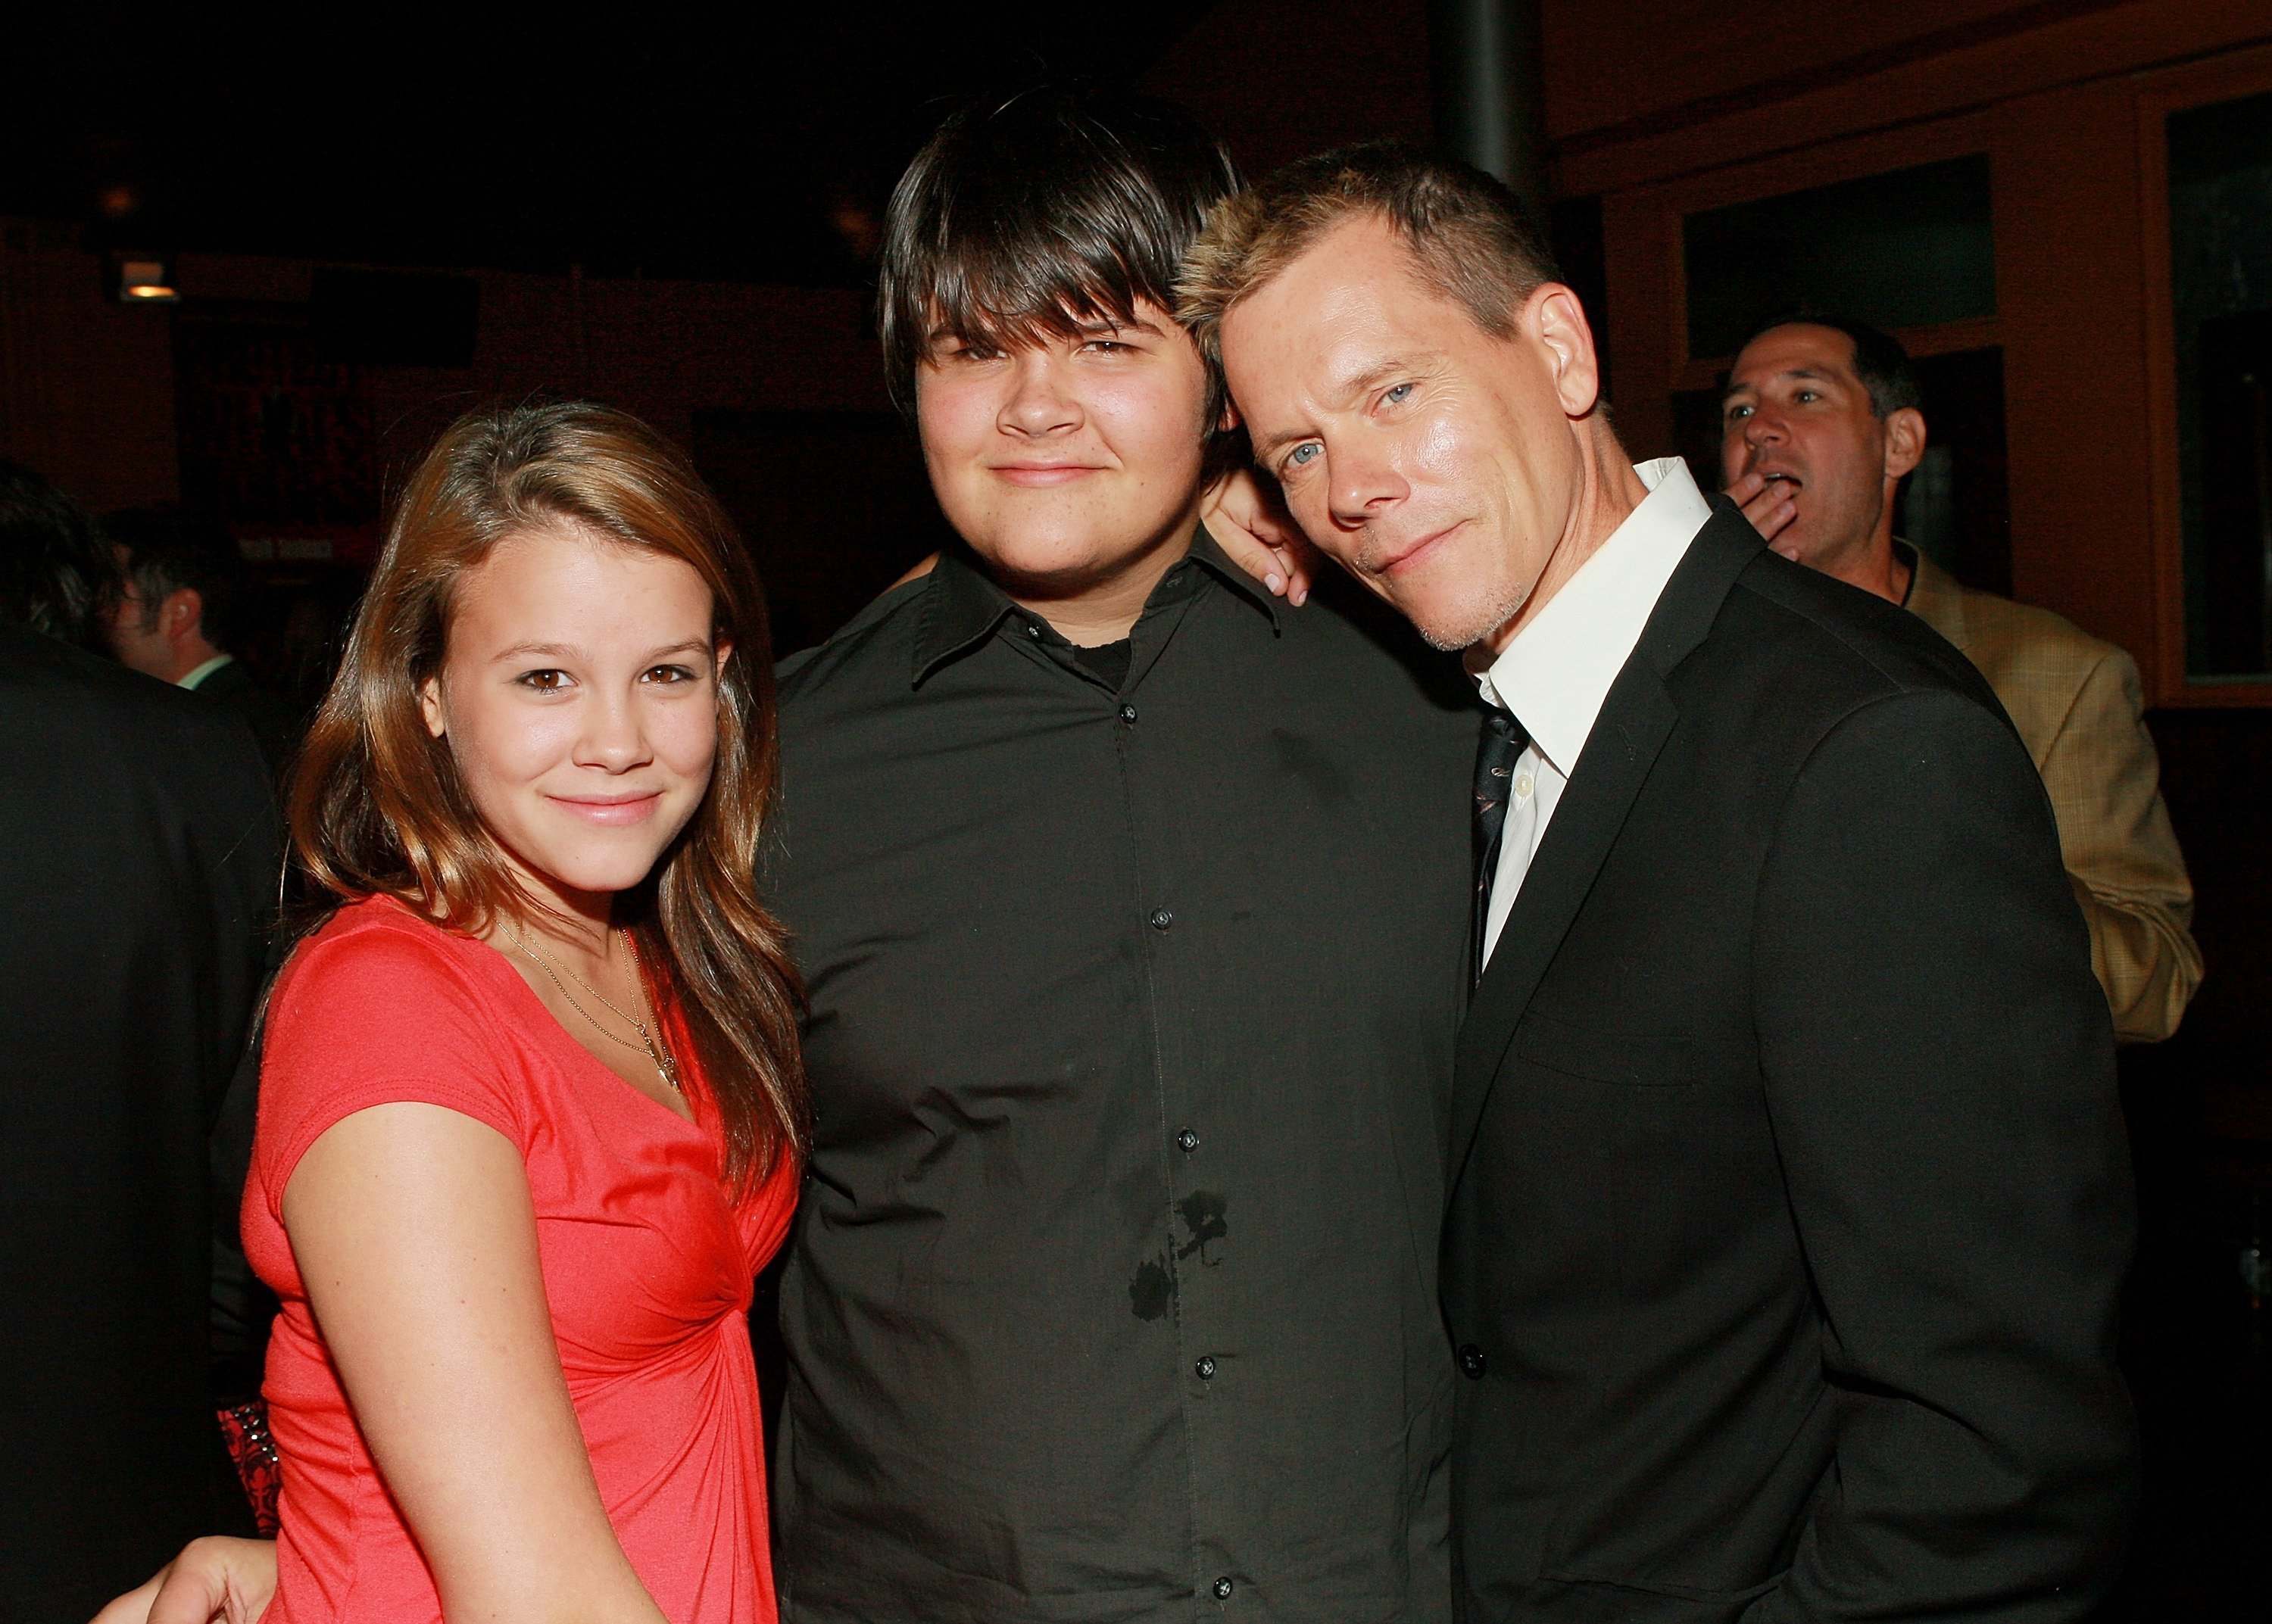 Kevin Bacon and children Sosie and Travis attend the "Death Sentence" premiere after party in New York City on August 28, 2007 | Photo: Getty Images